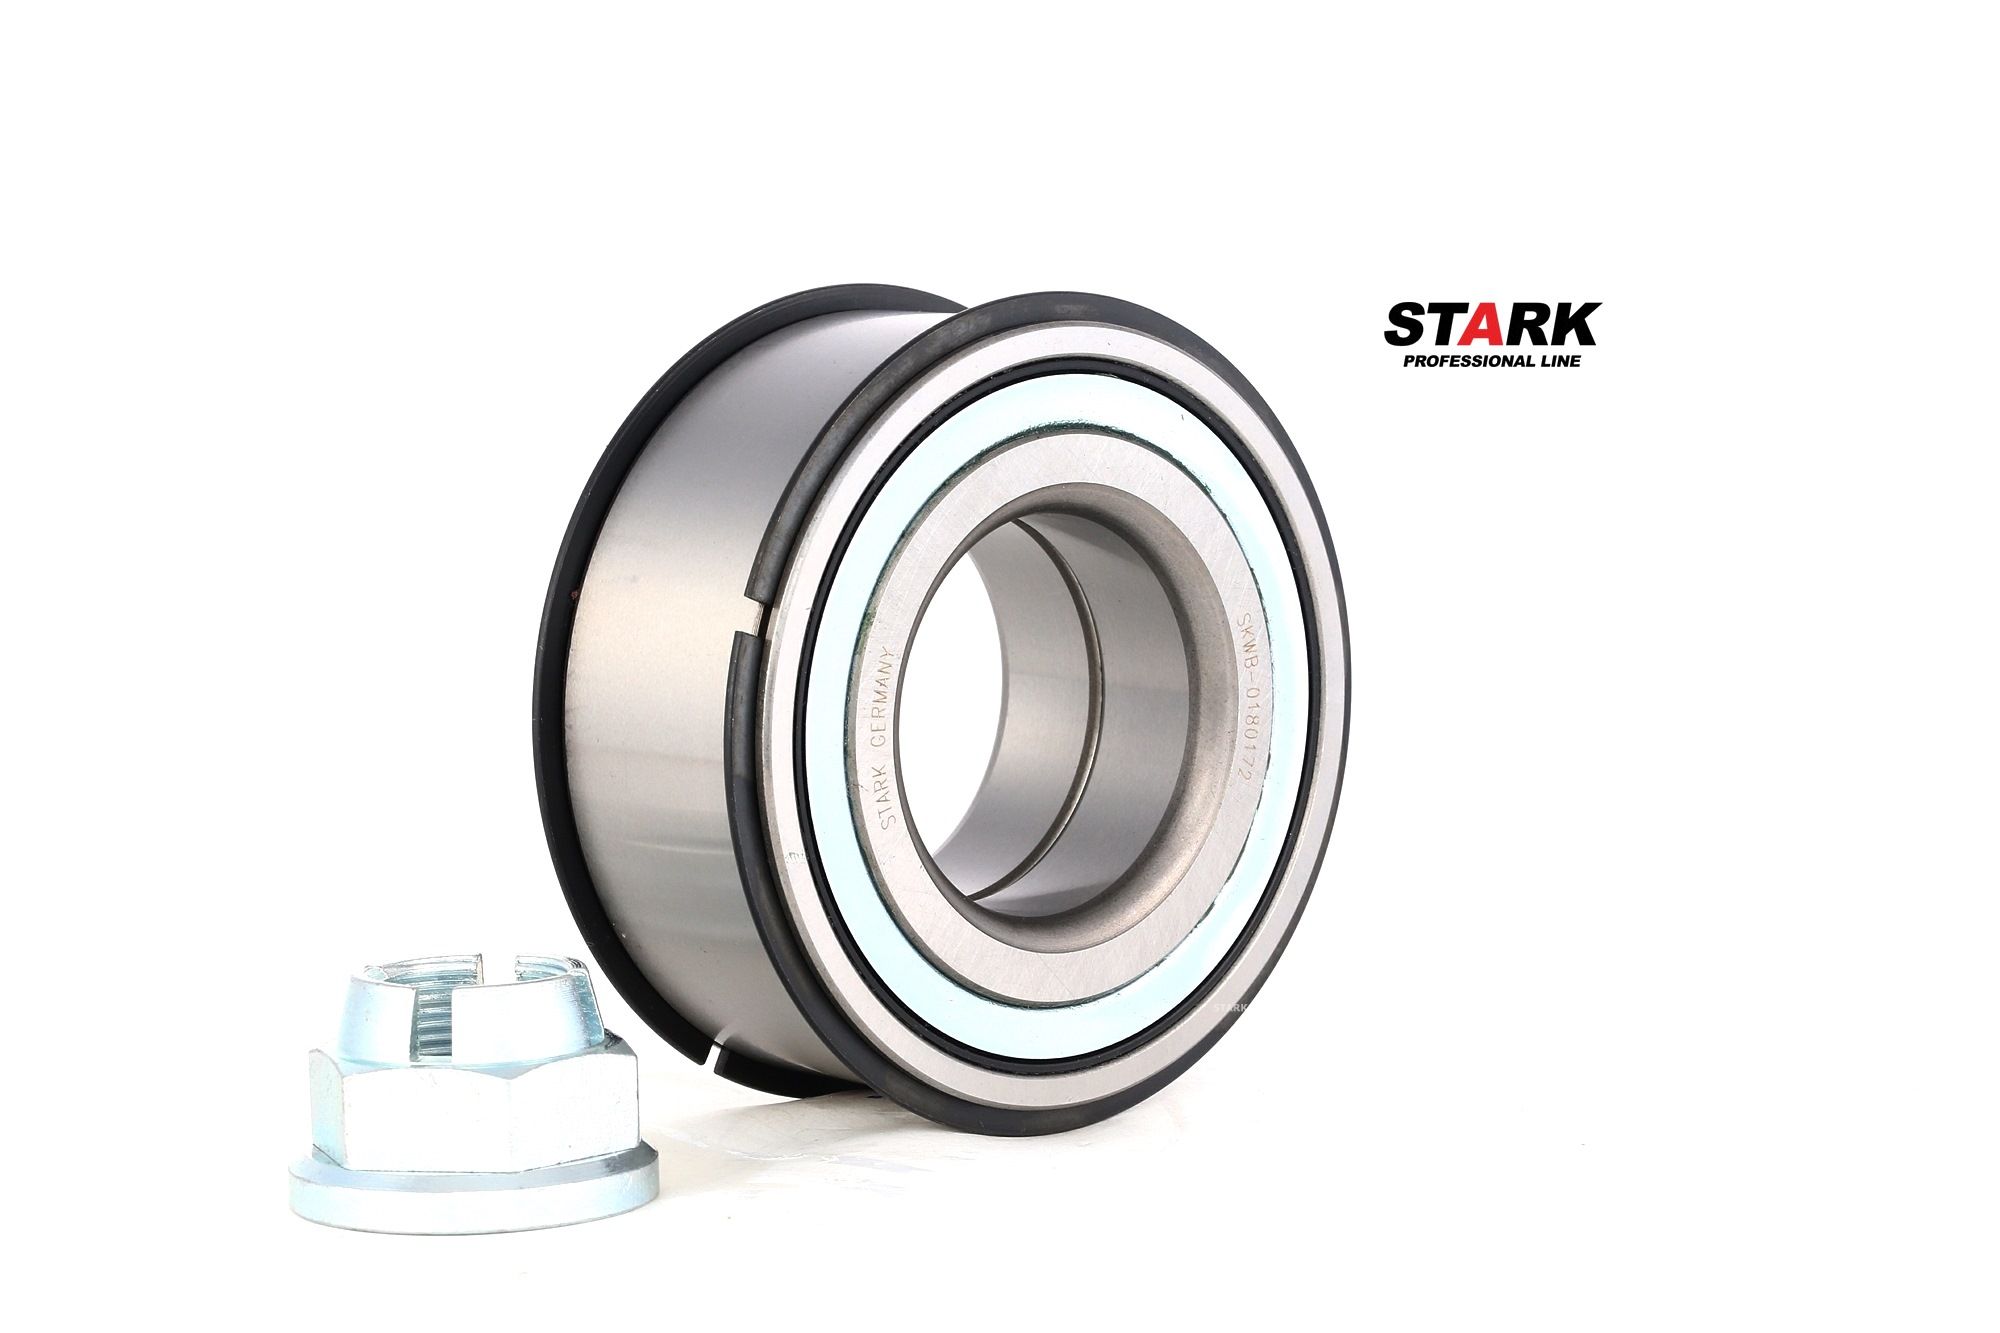 SKWB-0180172 STARK Wheel bearings RENAULT Front axle both sides, 88 mm